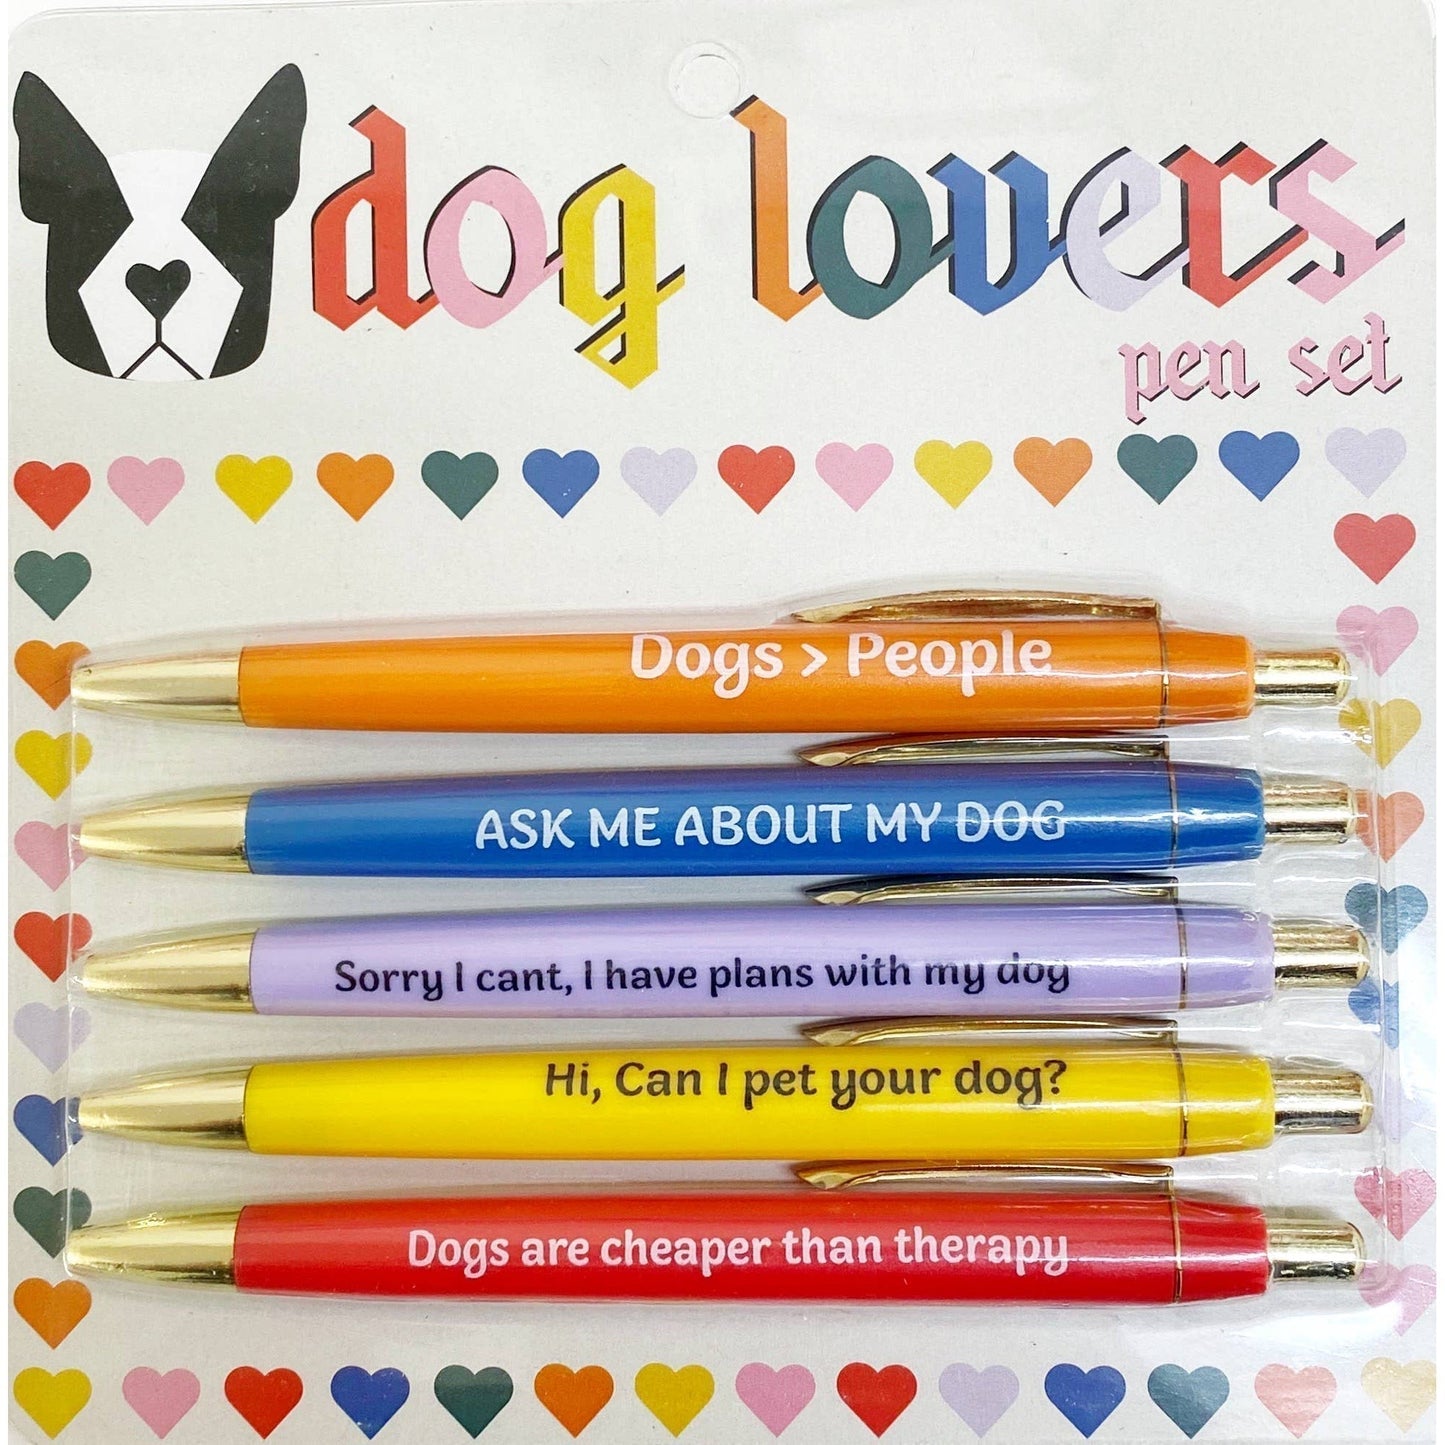 https://shop.getbullish.com/cdn/shop/files/Dog-Lovers-Multicolor-Pen-Set-5-Funny-Pens-Packaged-for-Gifting-Dogs-People-Dogs-Are-Cheaper-Than-Therapy.jpg?v=1690233497&width=1445